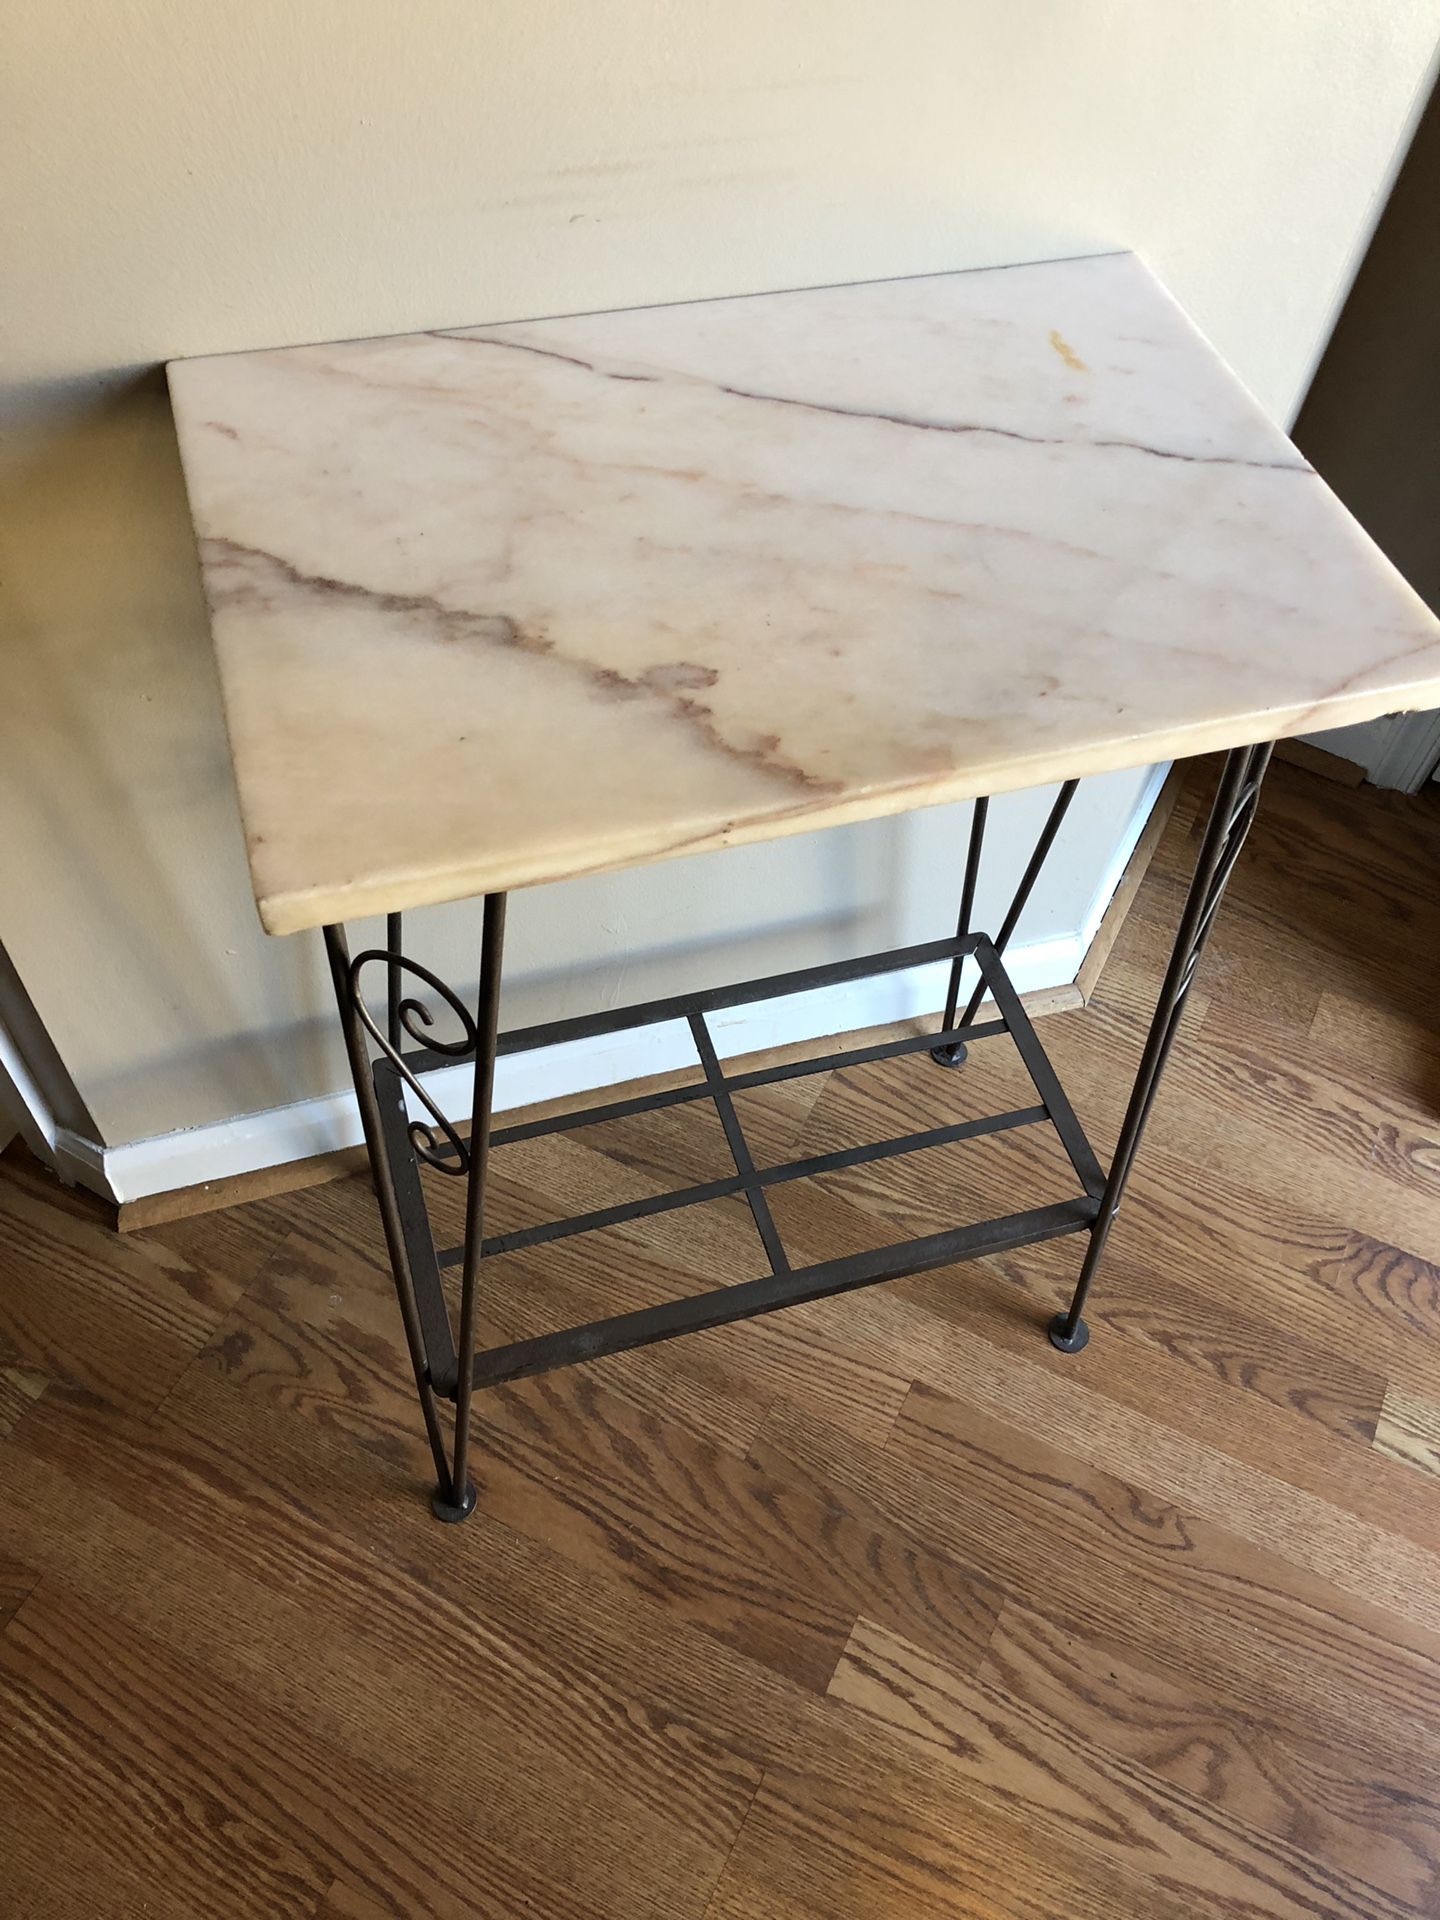 Small antique marble top table. Price reduced, must go!